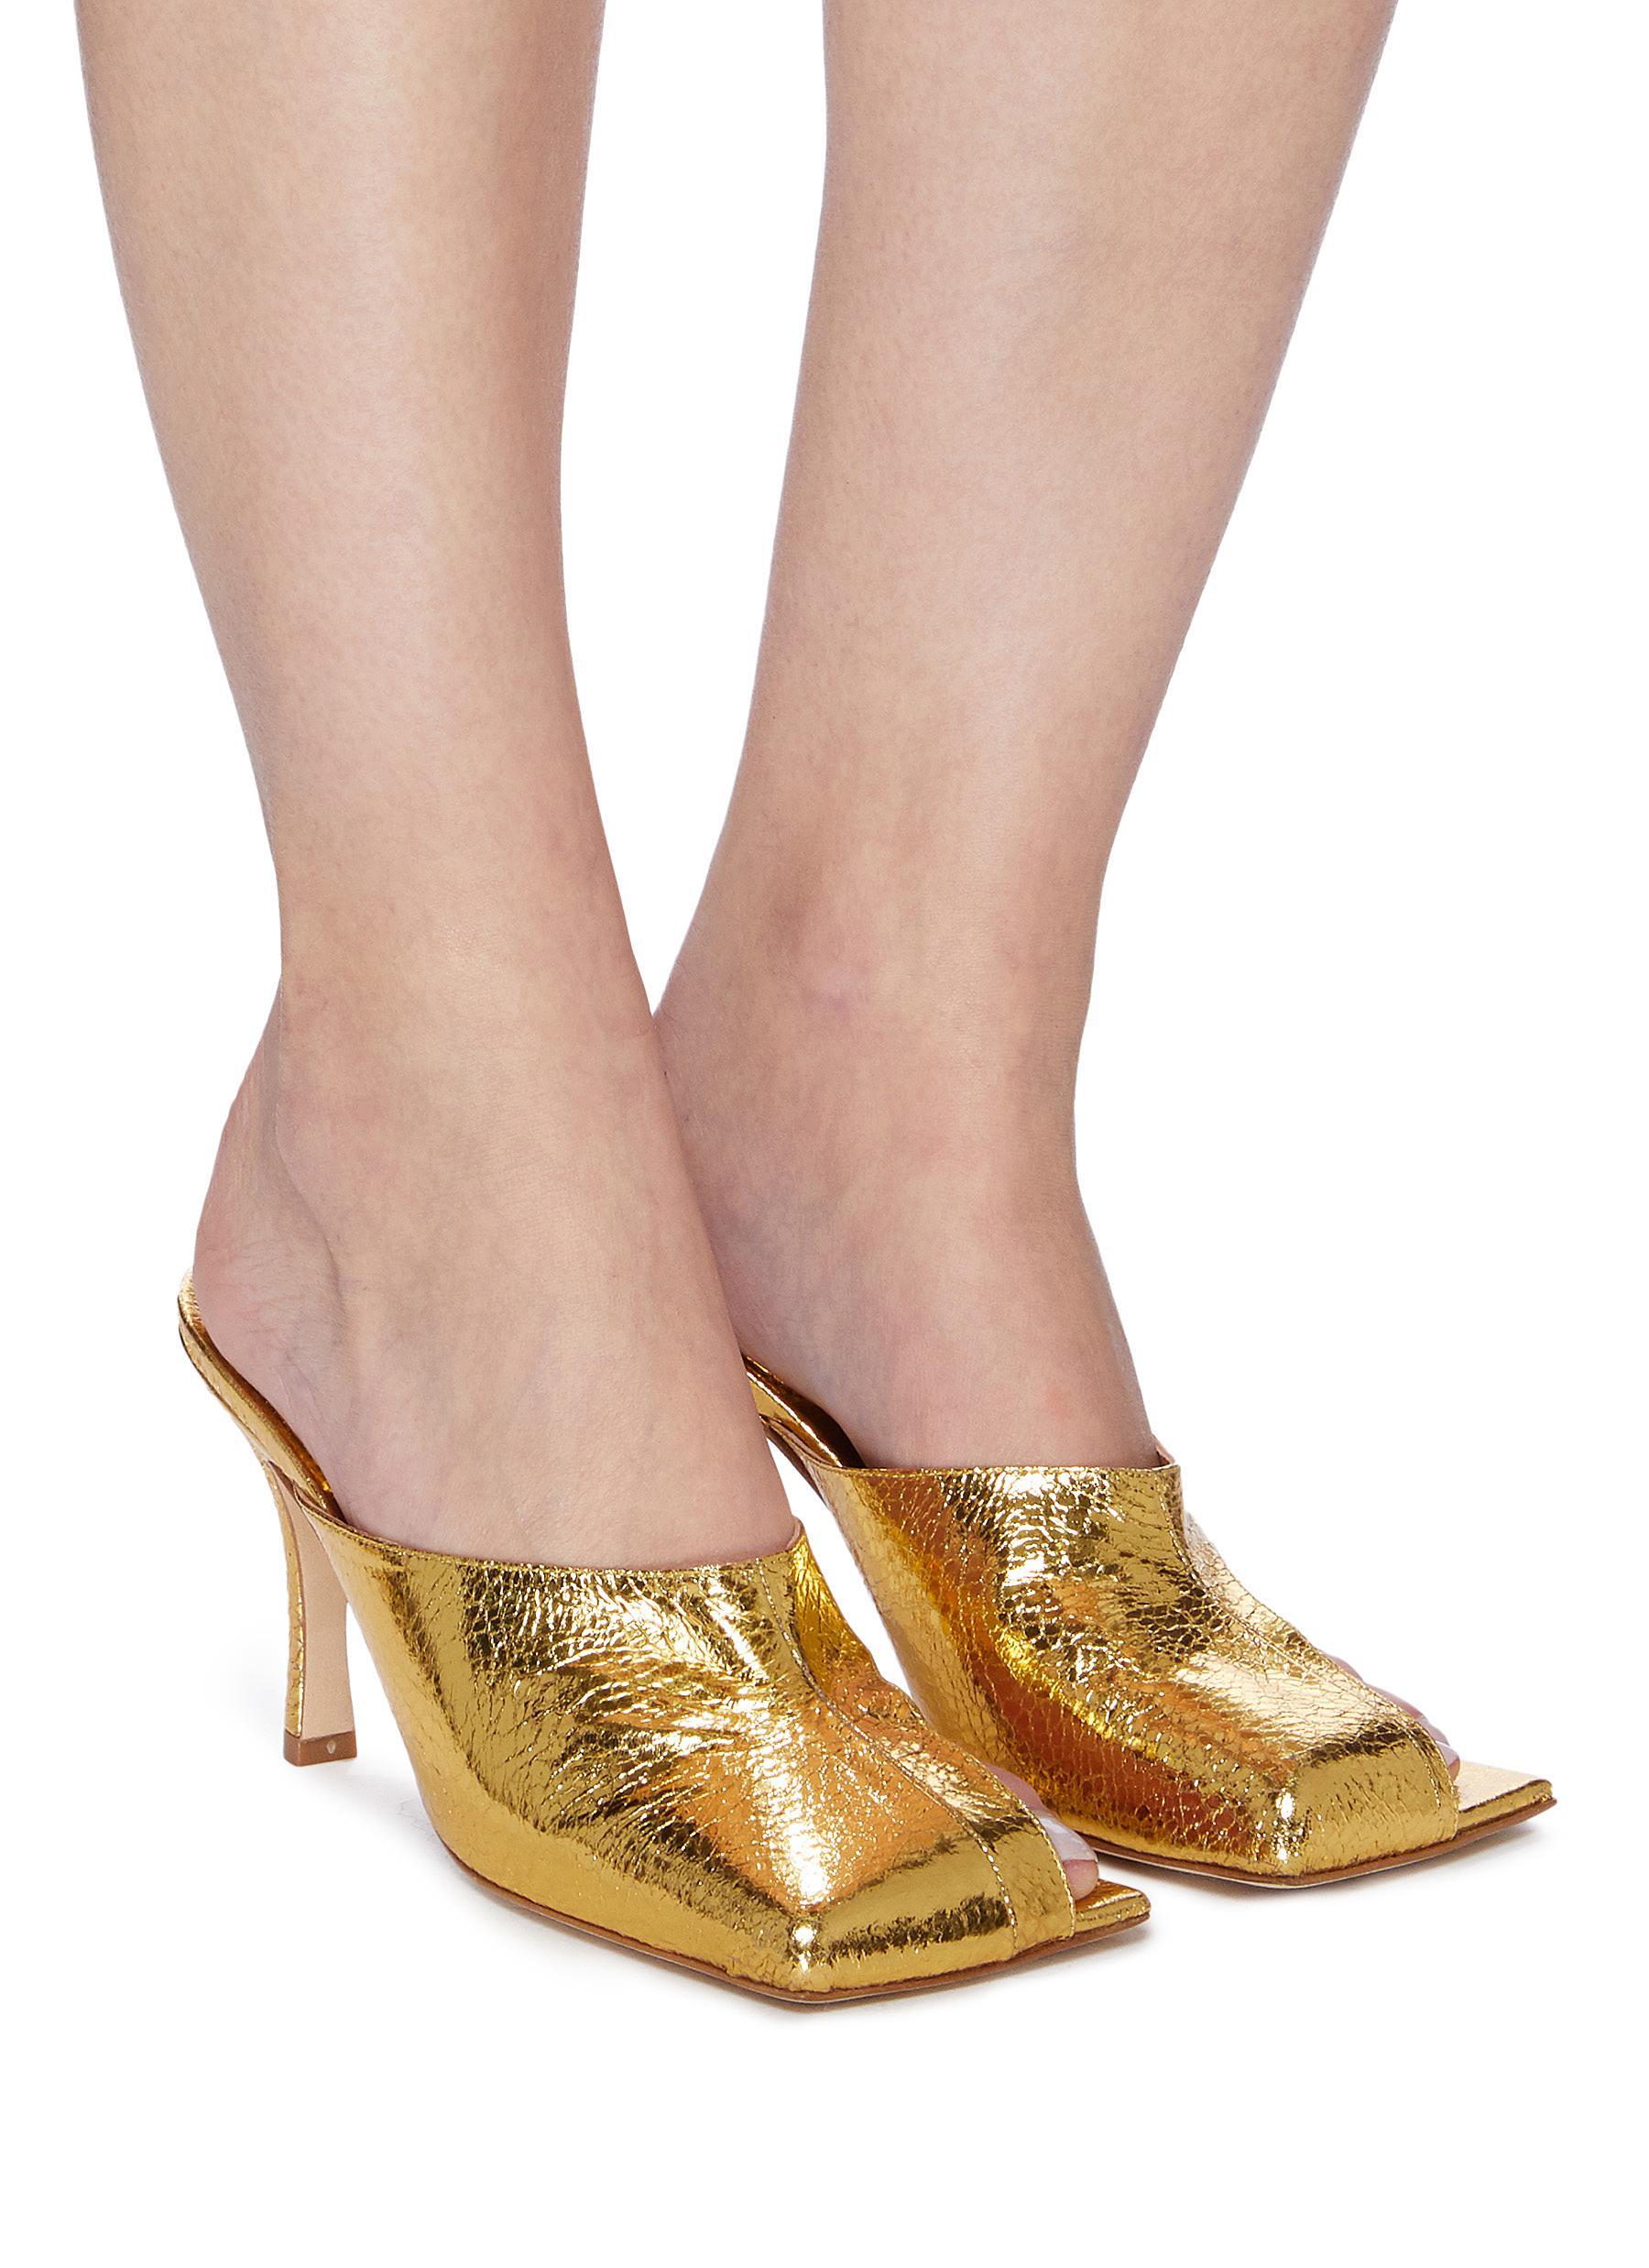 A.W.A.K.E. MODE 'mary' Square Toe Crinkled Leather Heeled Mules in Metallic  | Lyst